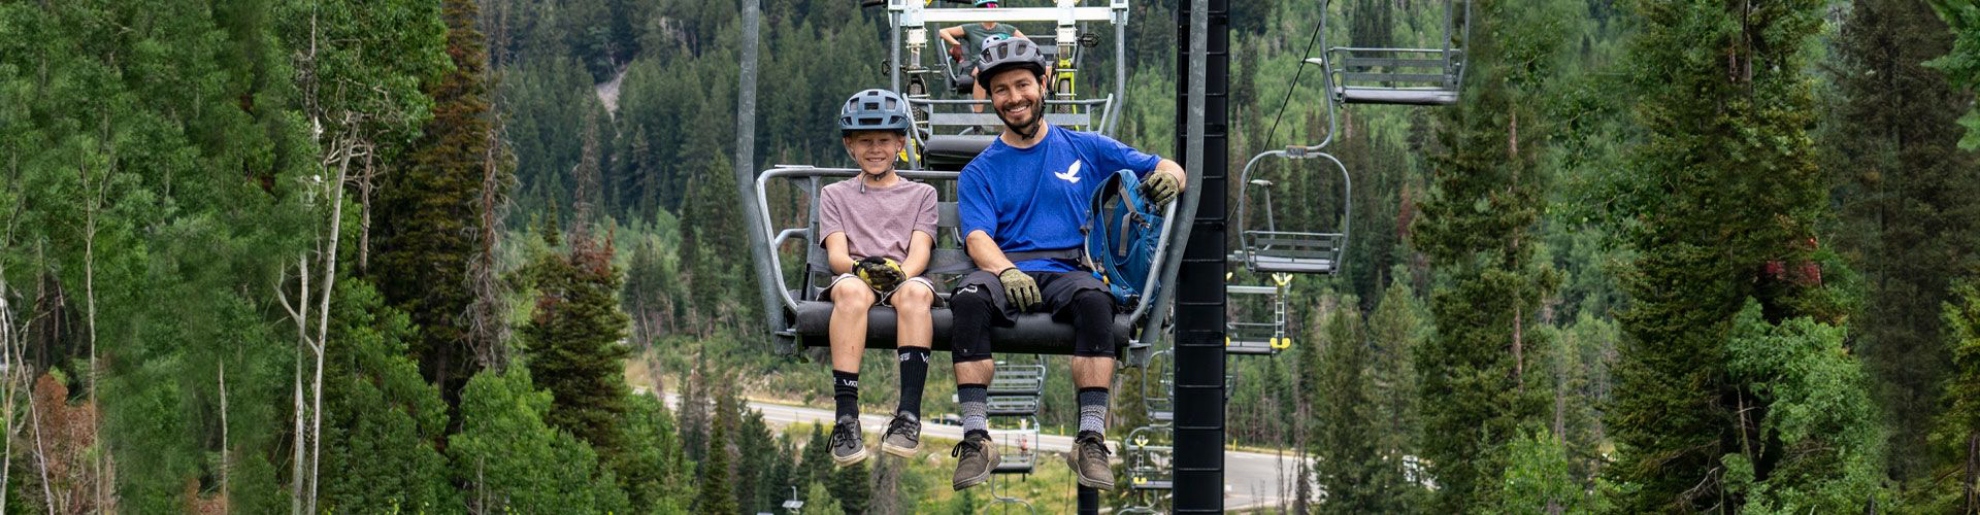 Picture of BIKE PARK LIFT TICKETS